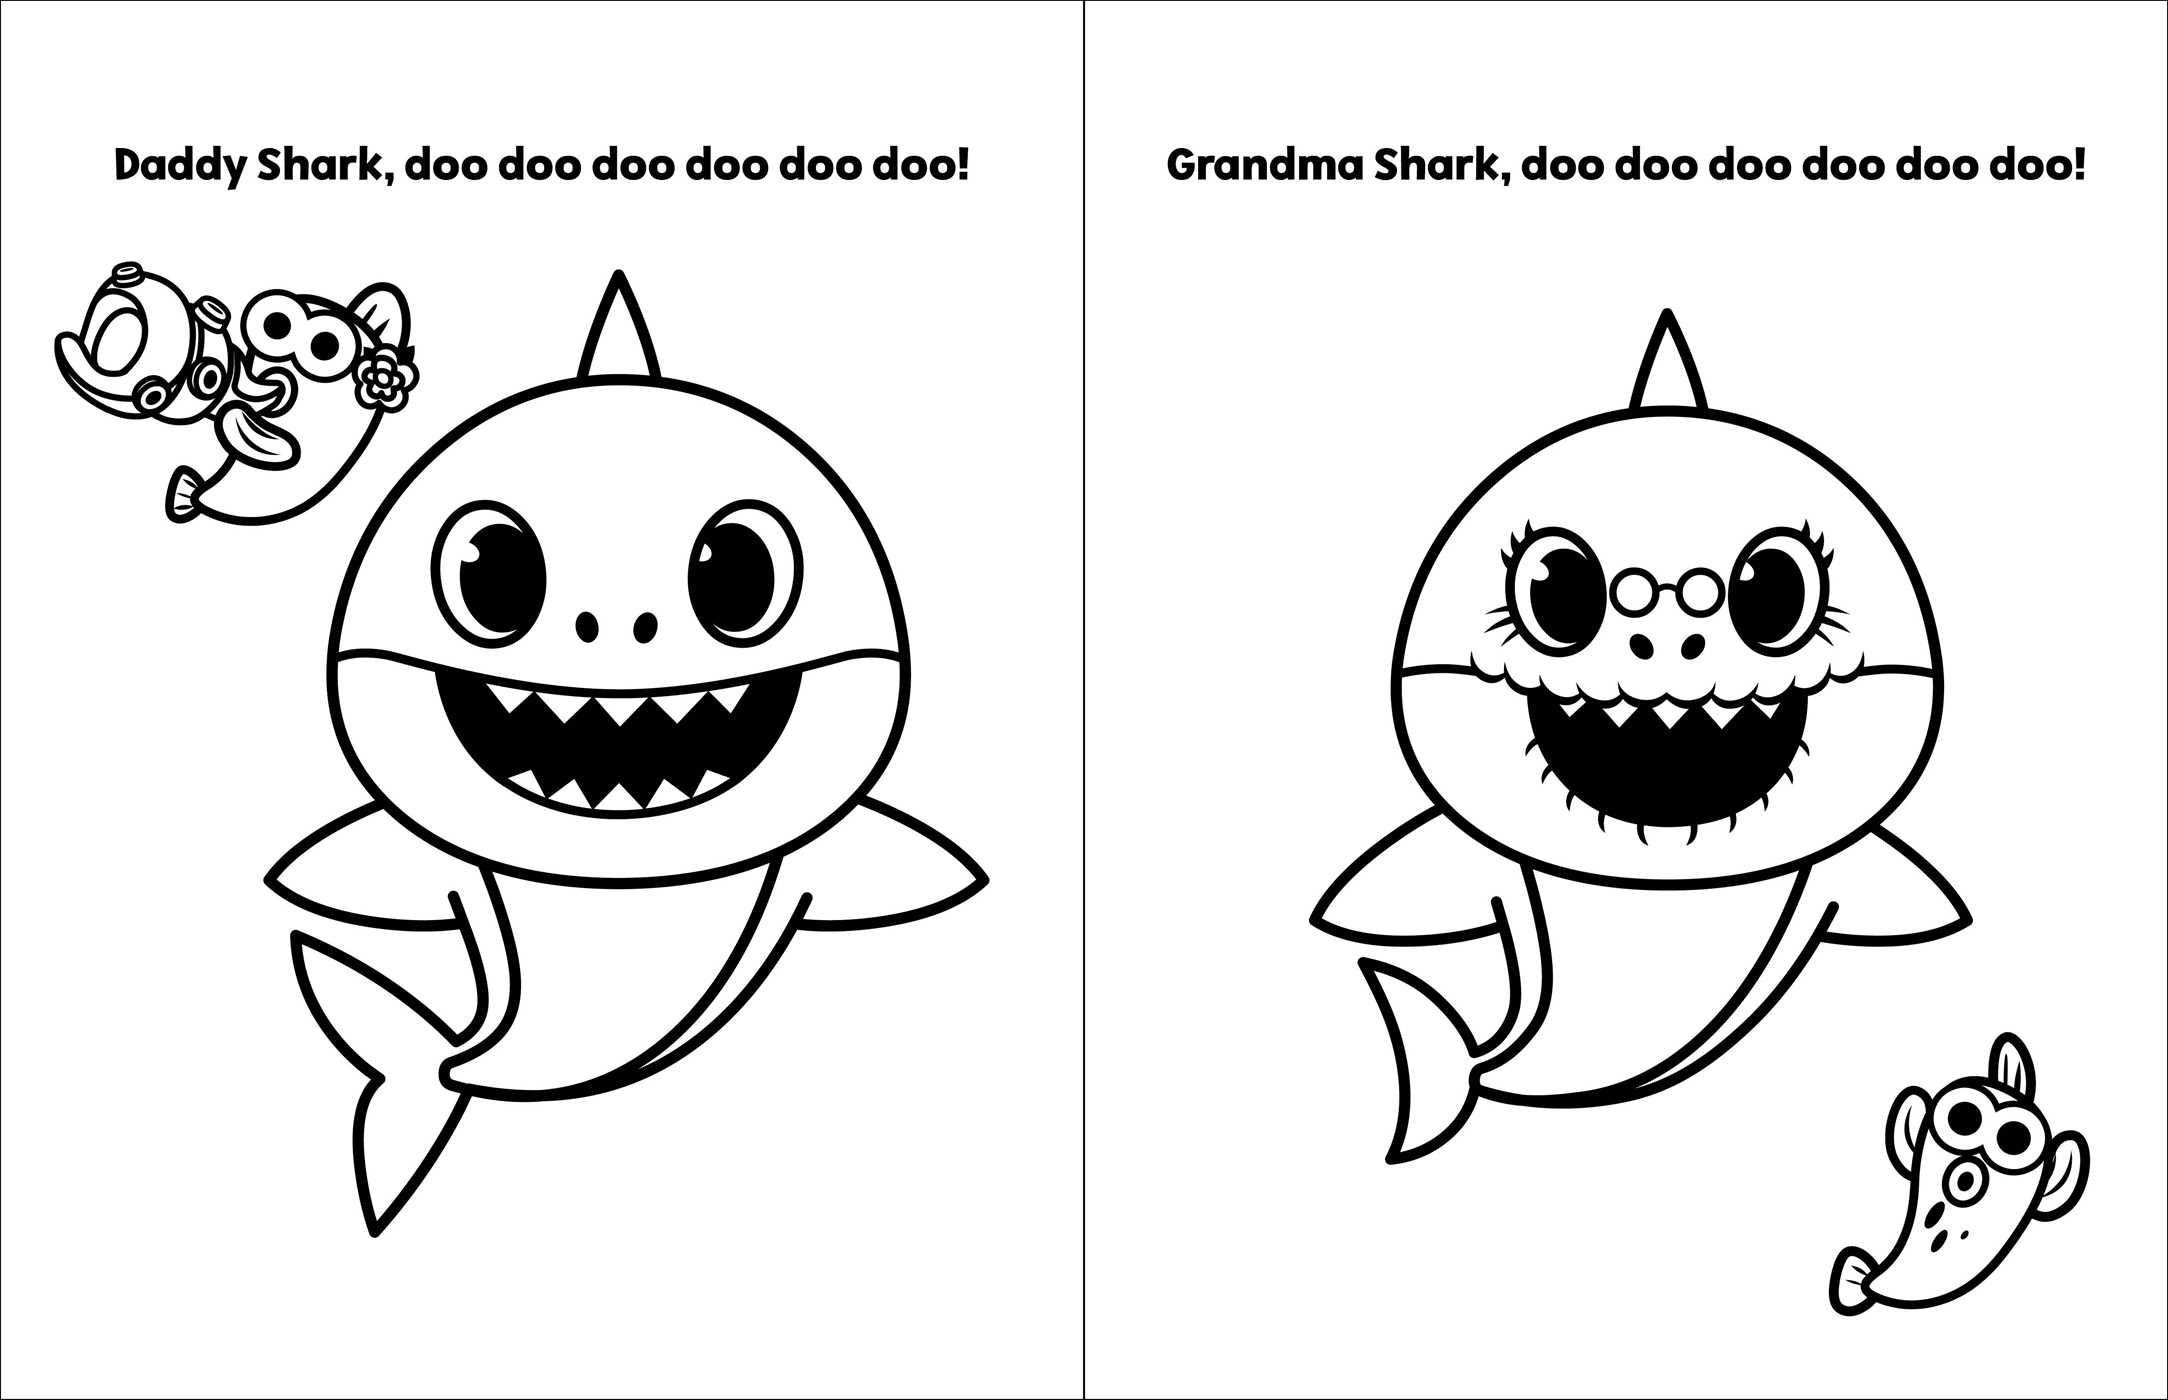 21 Ideas for Pinkfong Baby Shark Coloring Pages - Home, Family, Style